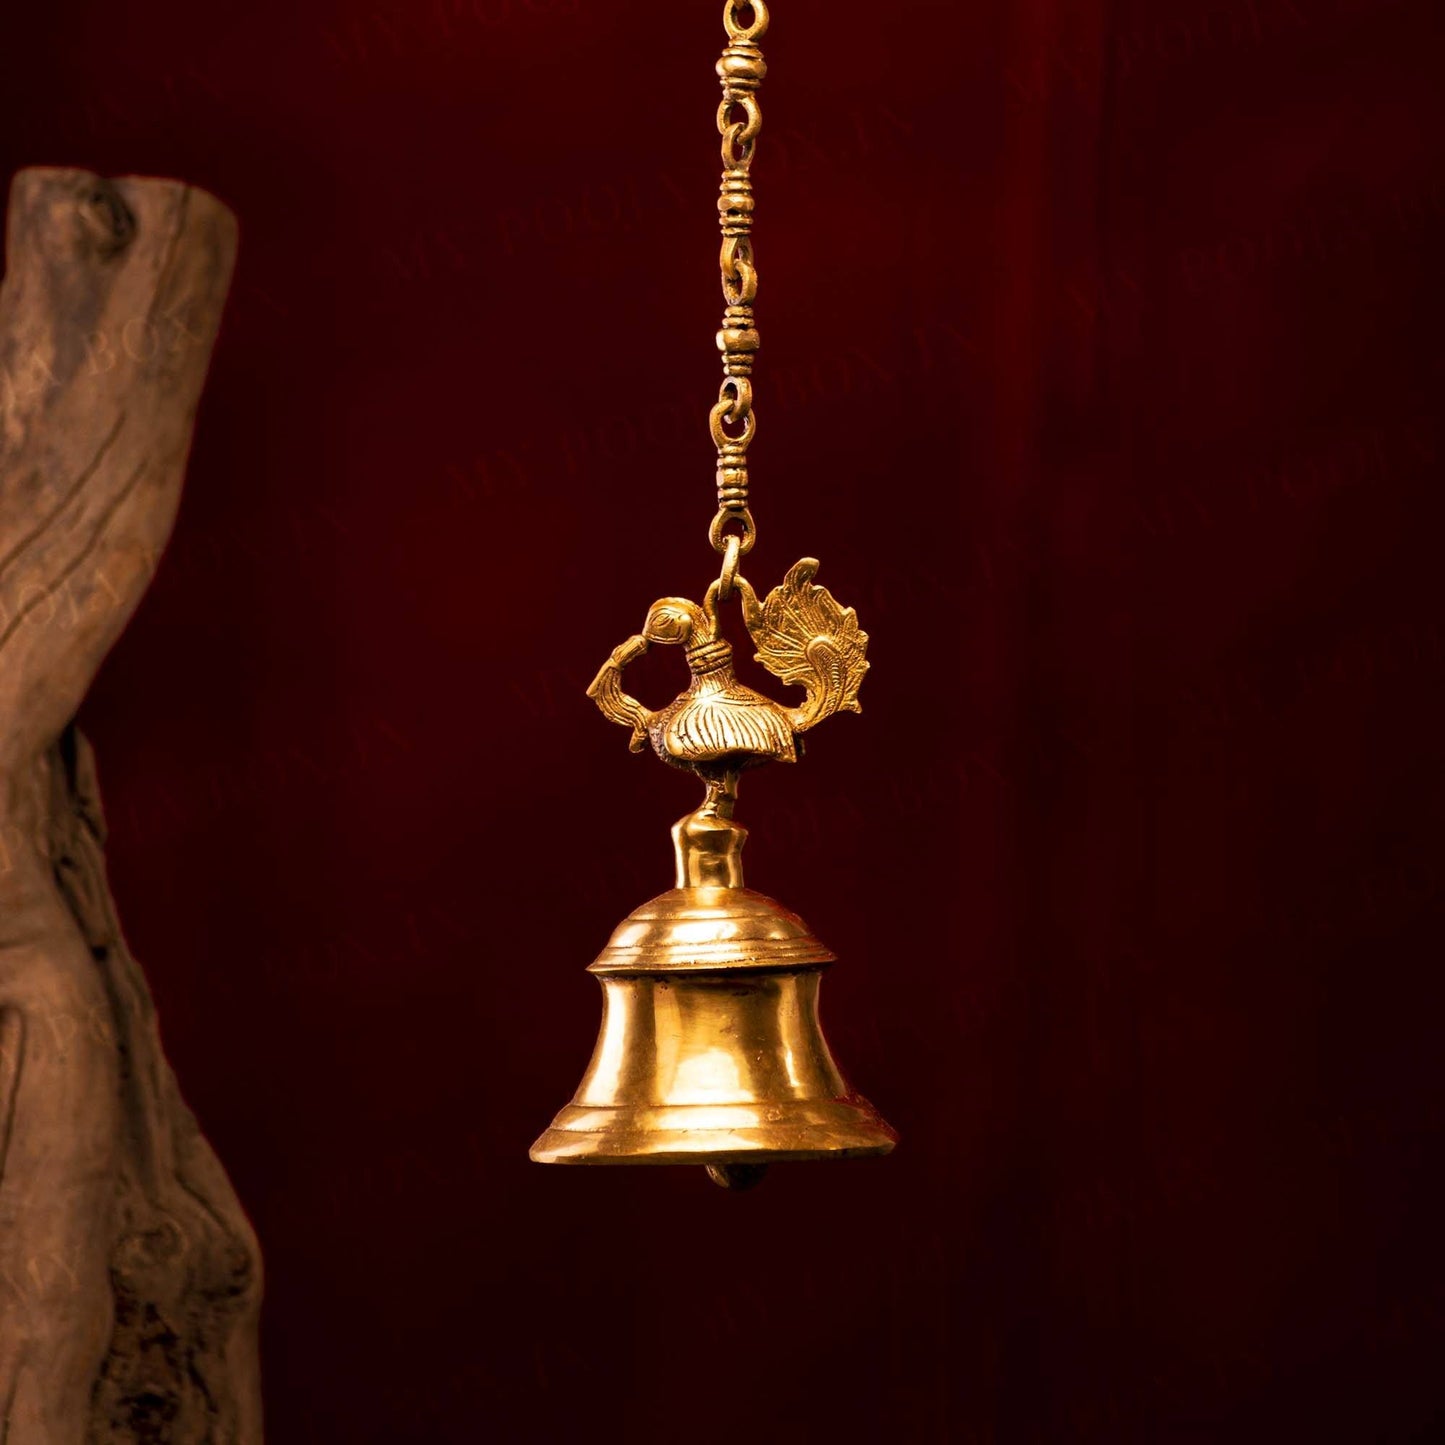 Handcrafted Brass Hanging Peacock Bell